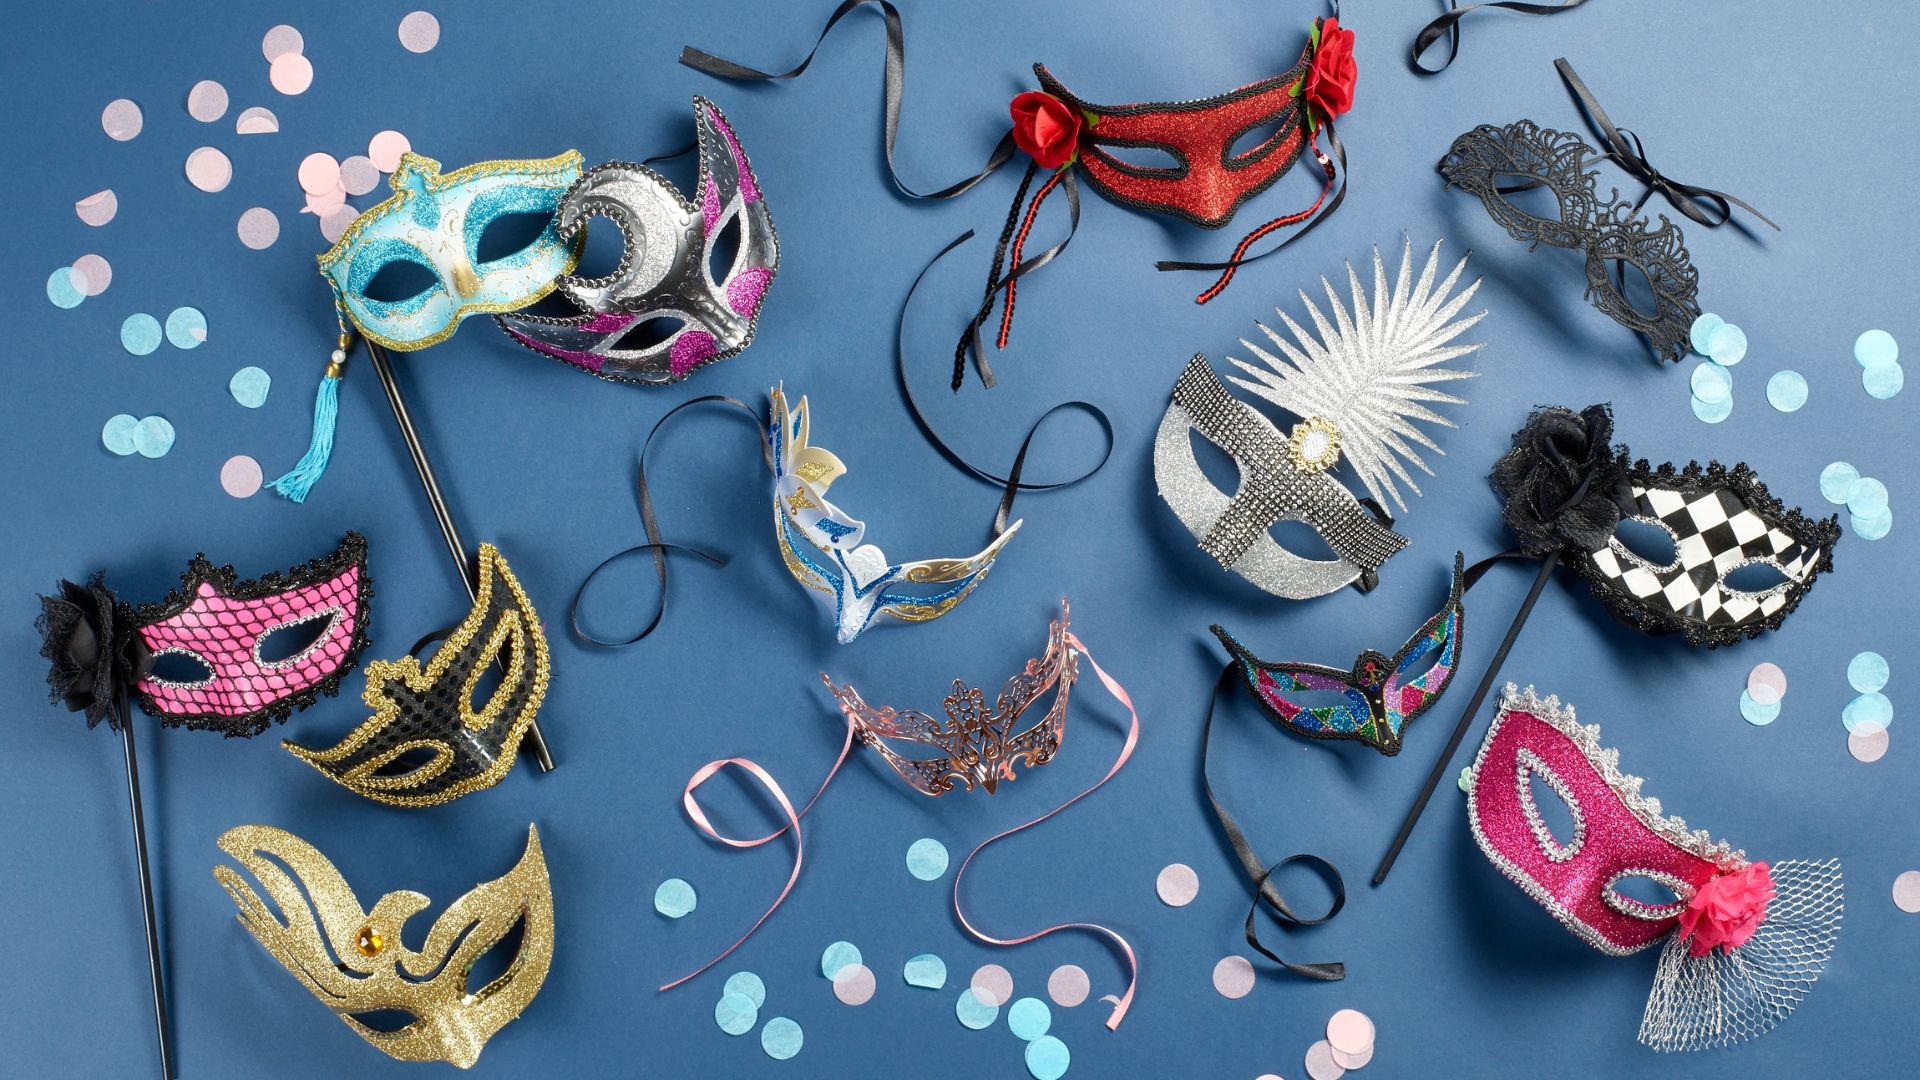 5 Steps To Throwing A Magical Masquerade Party